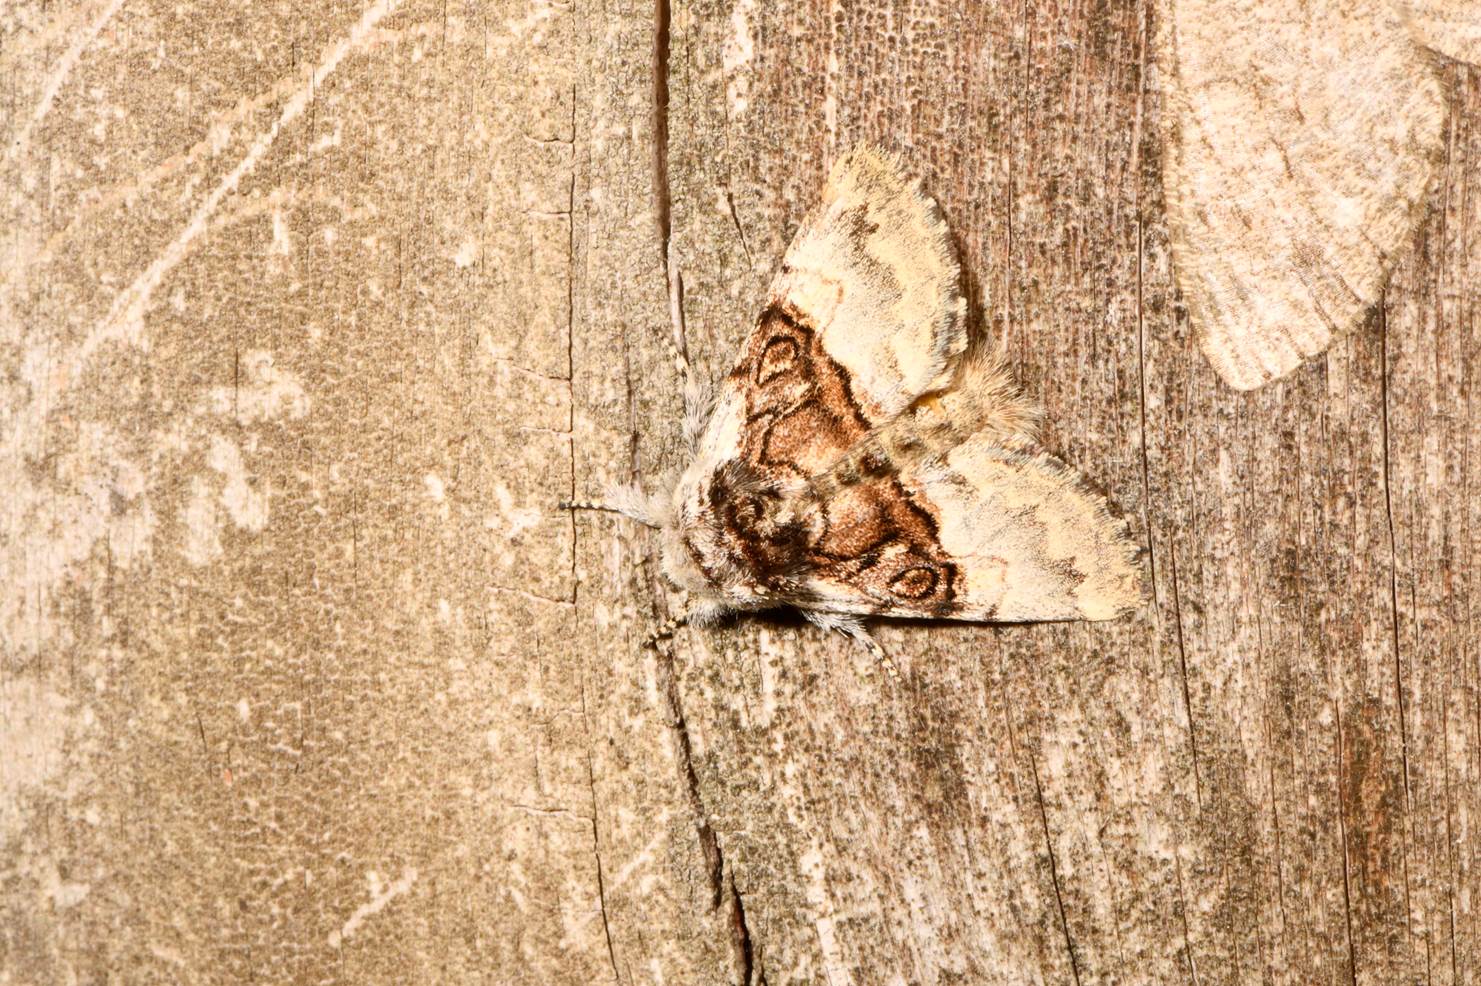 A moth on a tree

Description automatically generated